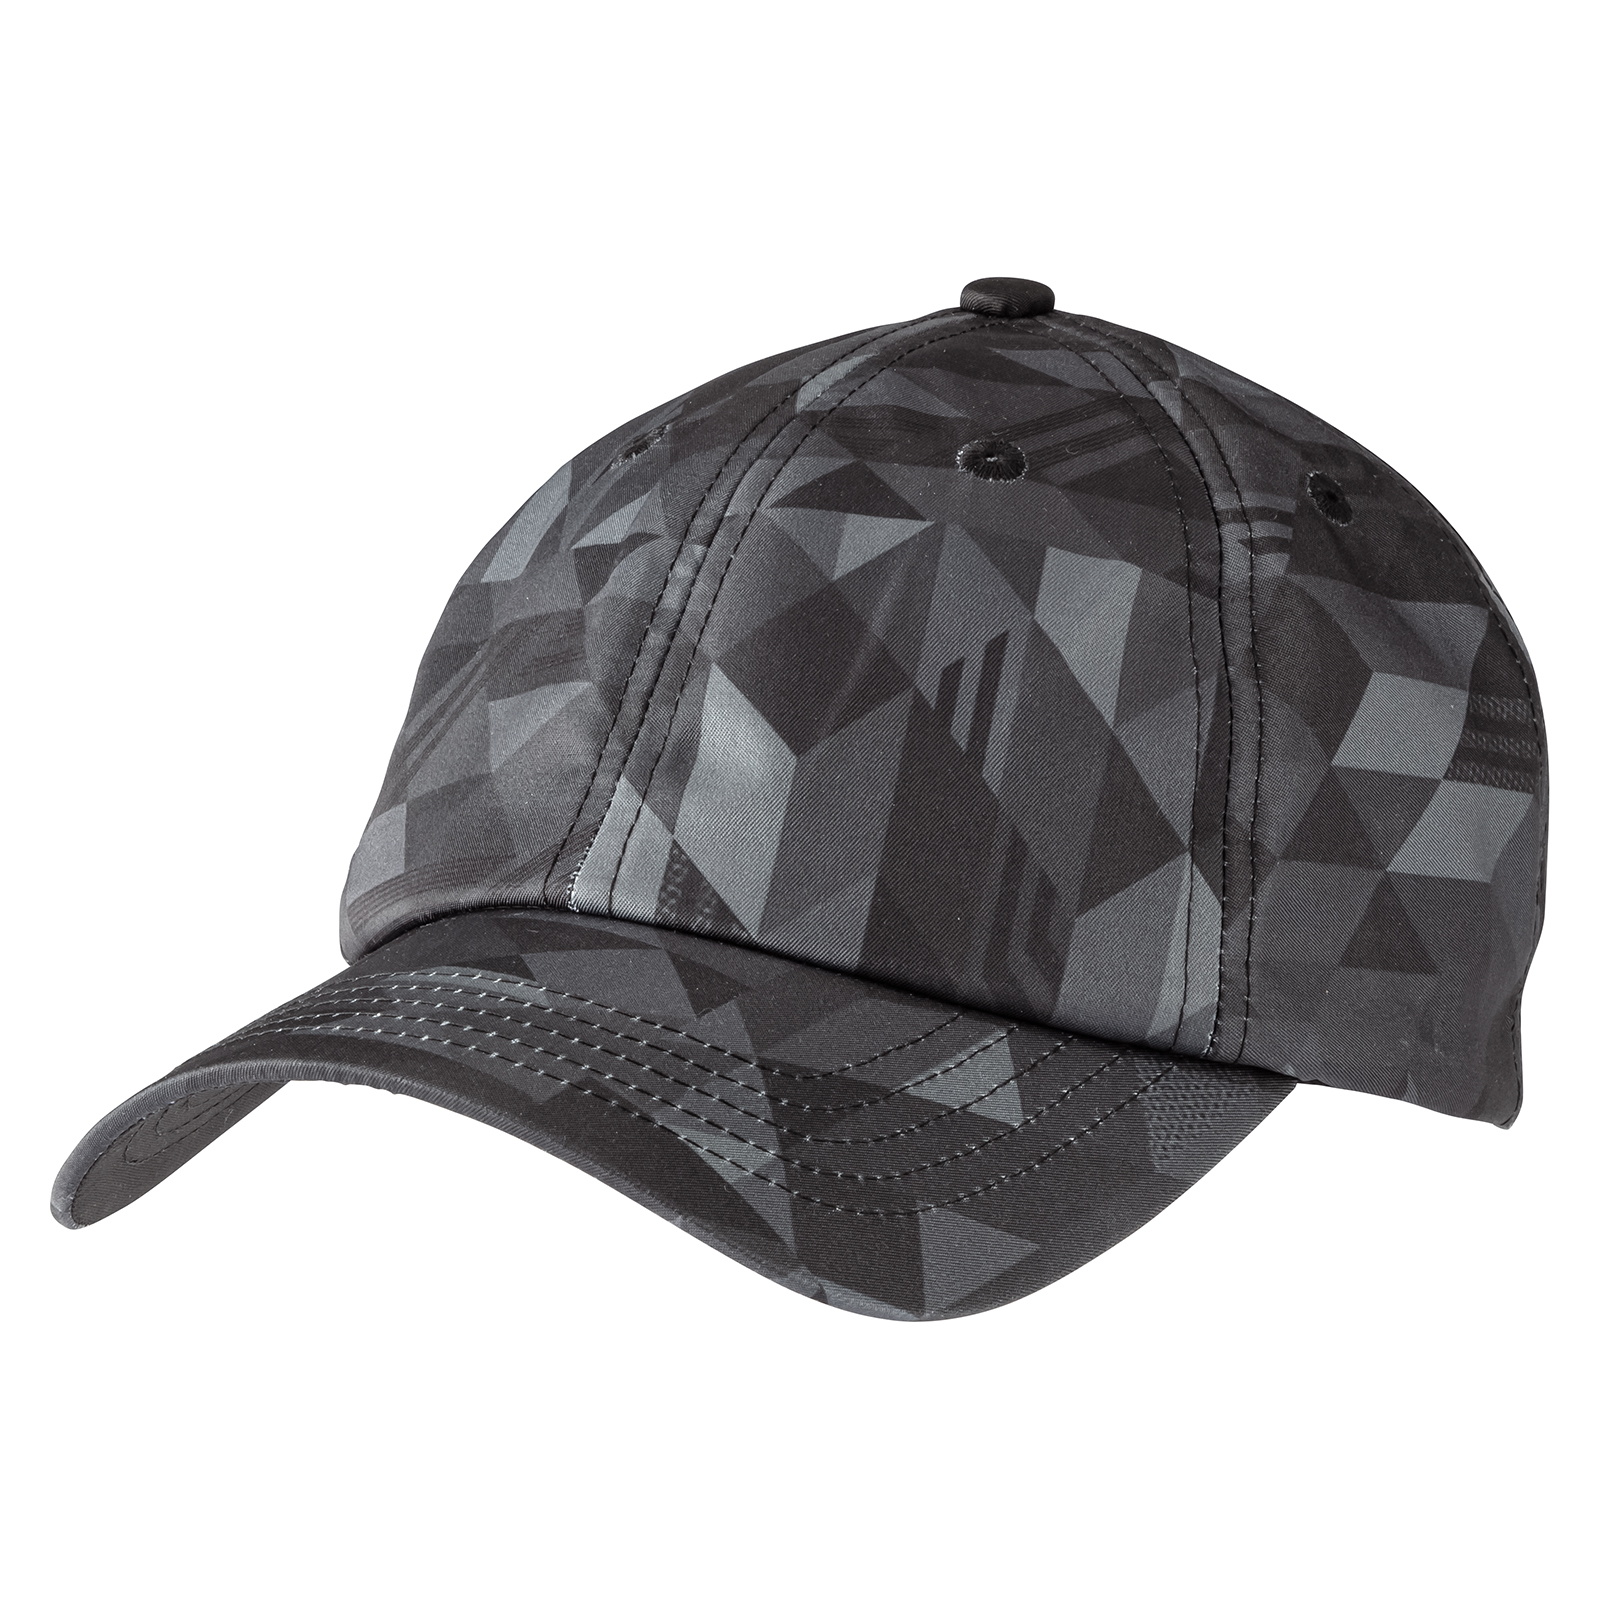 Men's stylish cap with graphic all-over print